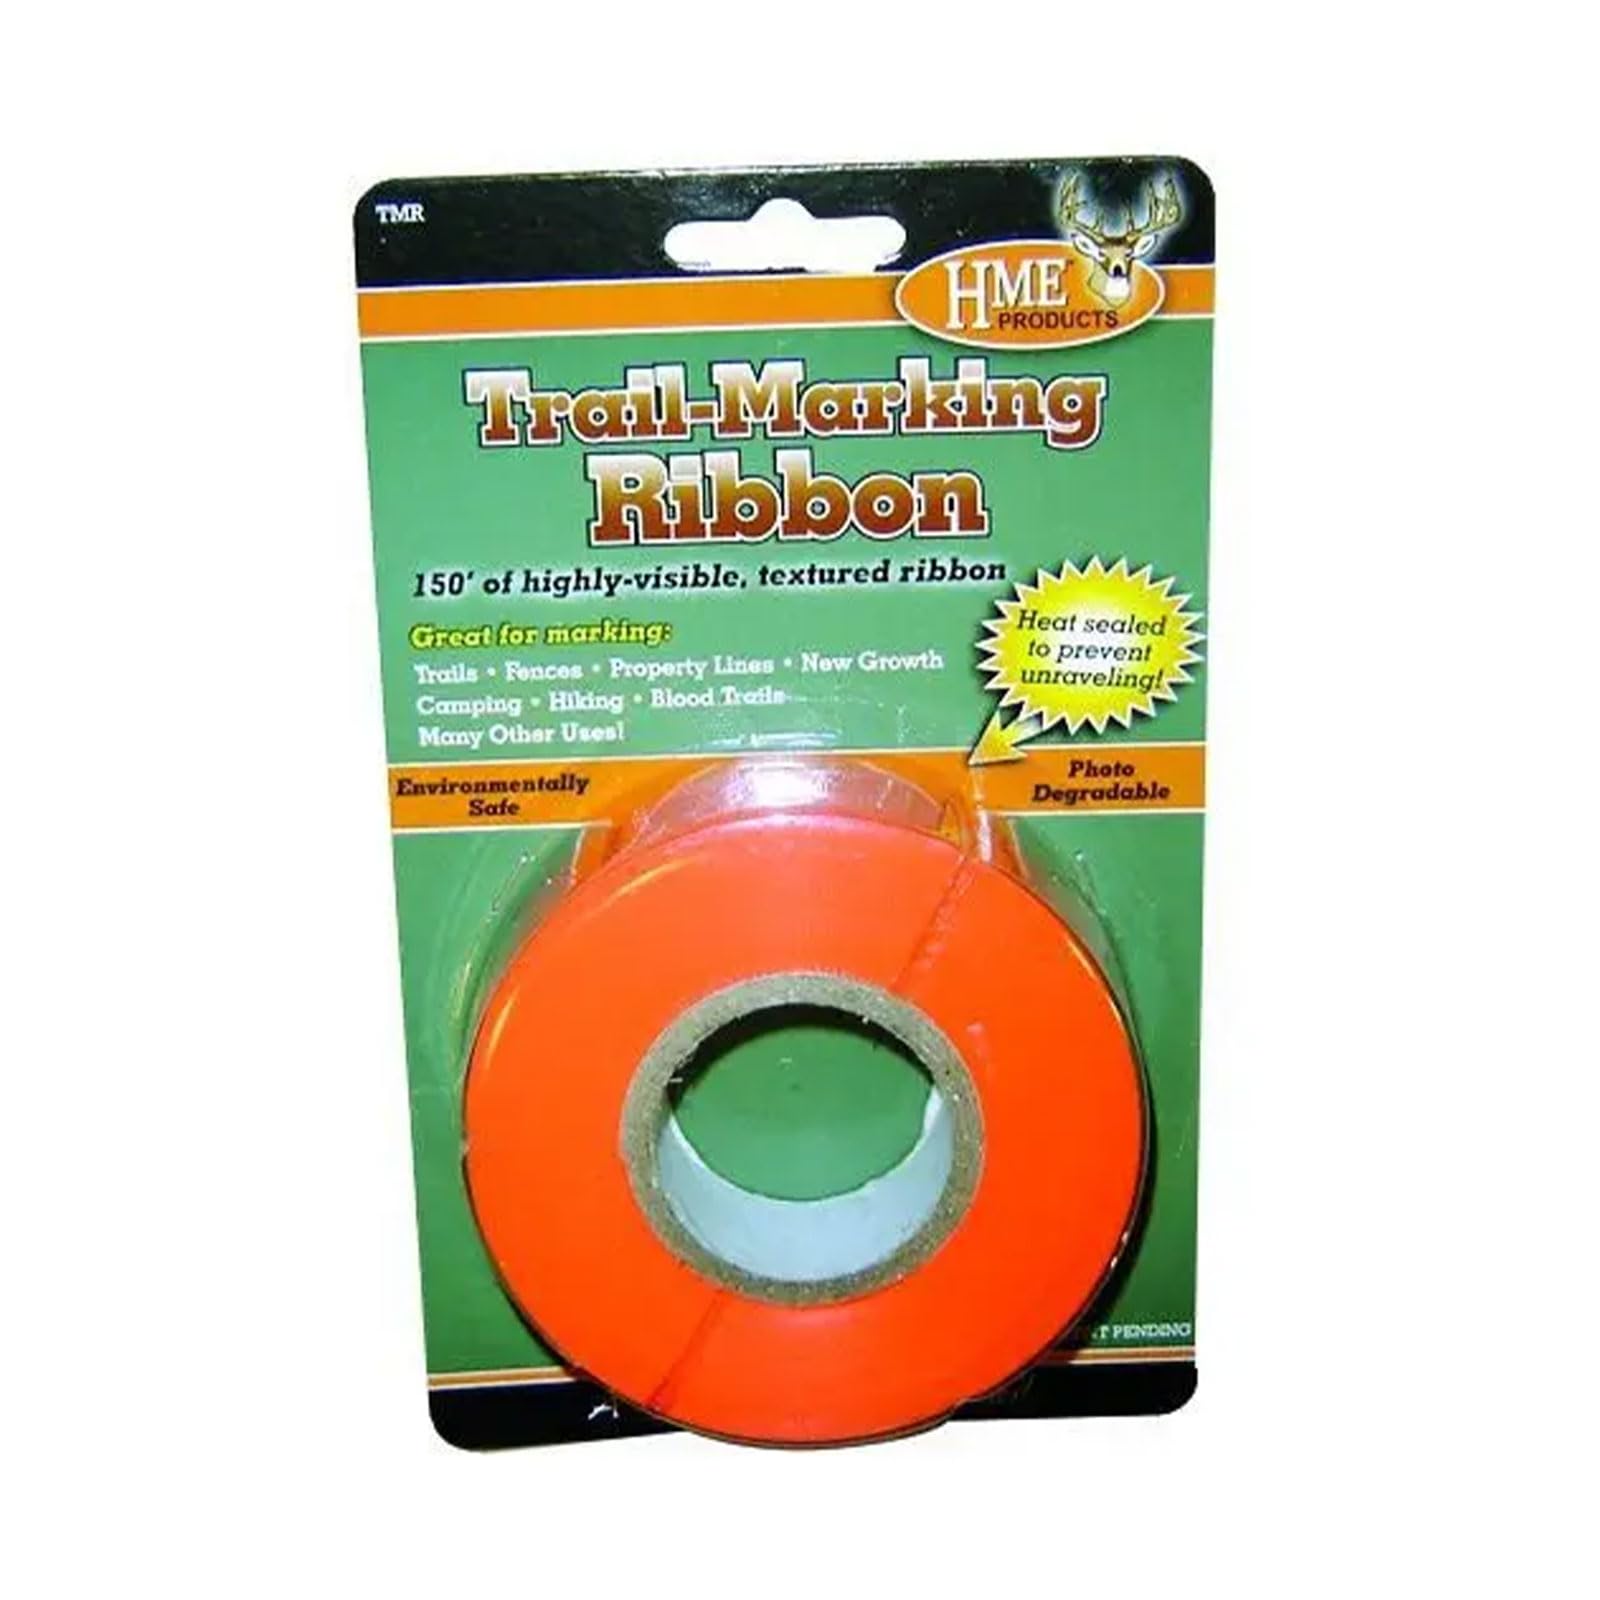 HME 150' Trail Marking Ribbon - Environmentally Safe Fluorescent Orange Rugged Weather-Resistant Hunting Tape